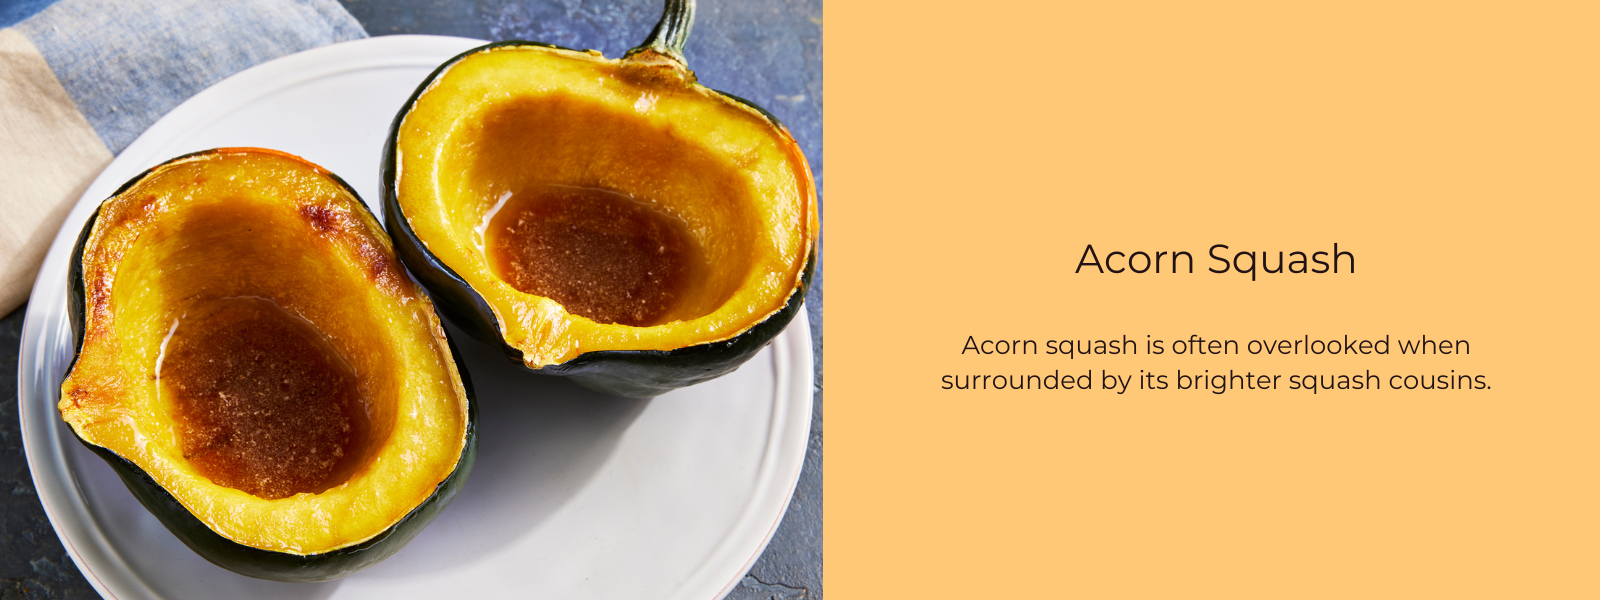 Acorn Squash – Health Benefits, Uses and Important Facts